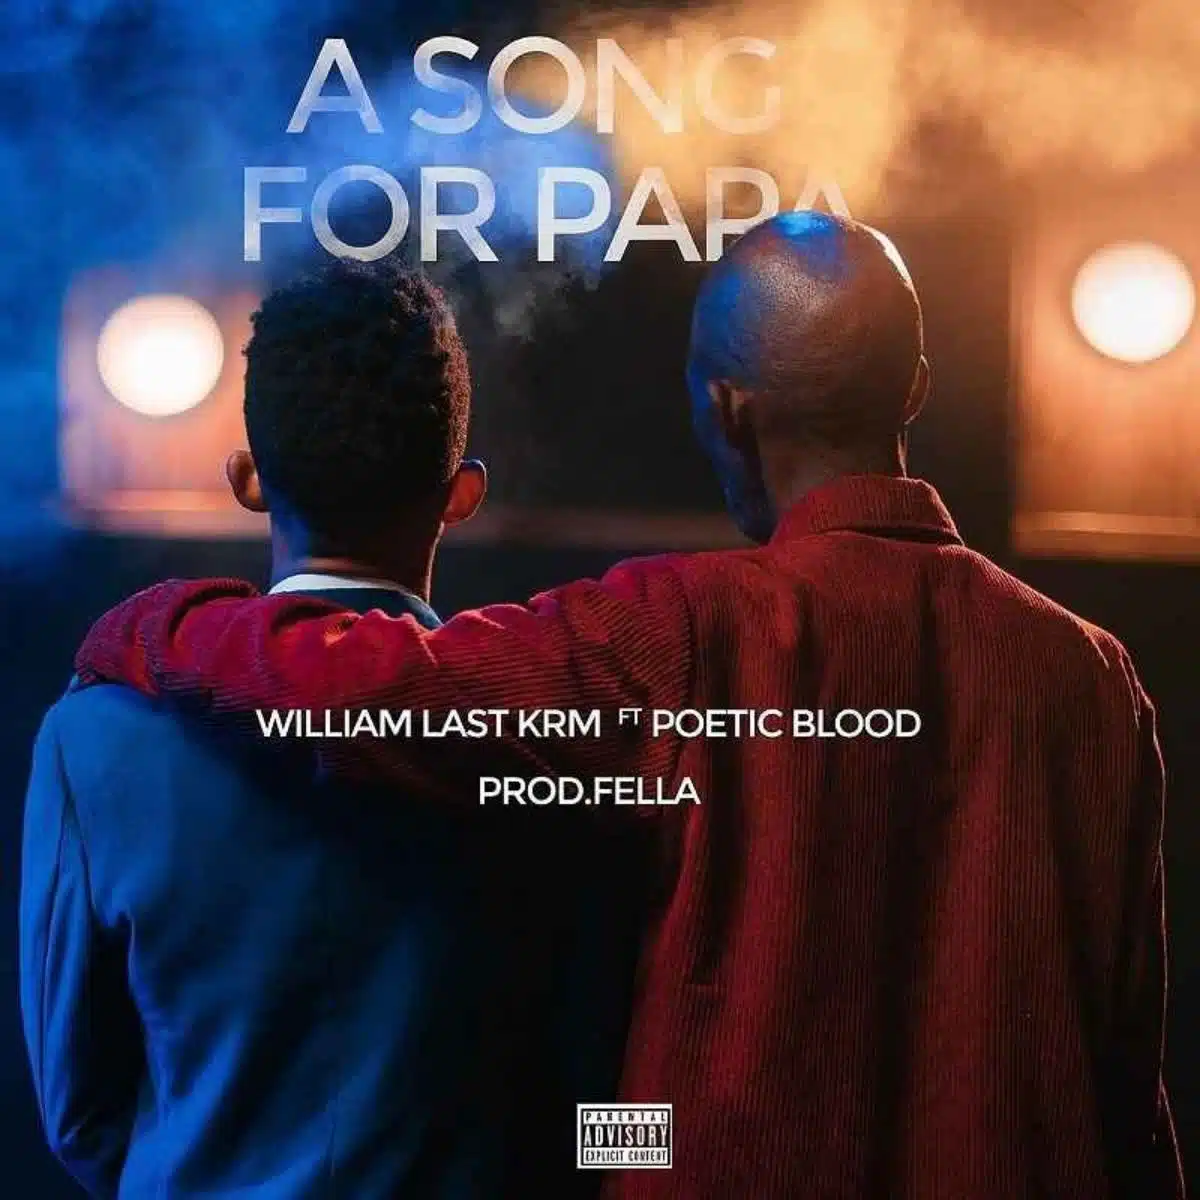 DOWNLOAD: William Last KRM Ft. Poeticblood – “A Song For Papa” Mp3